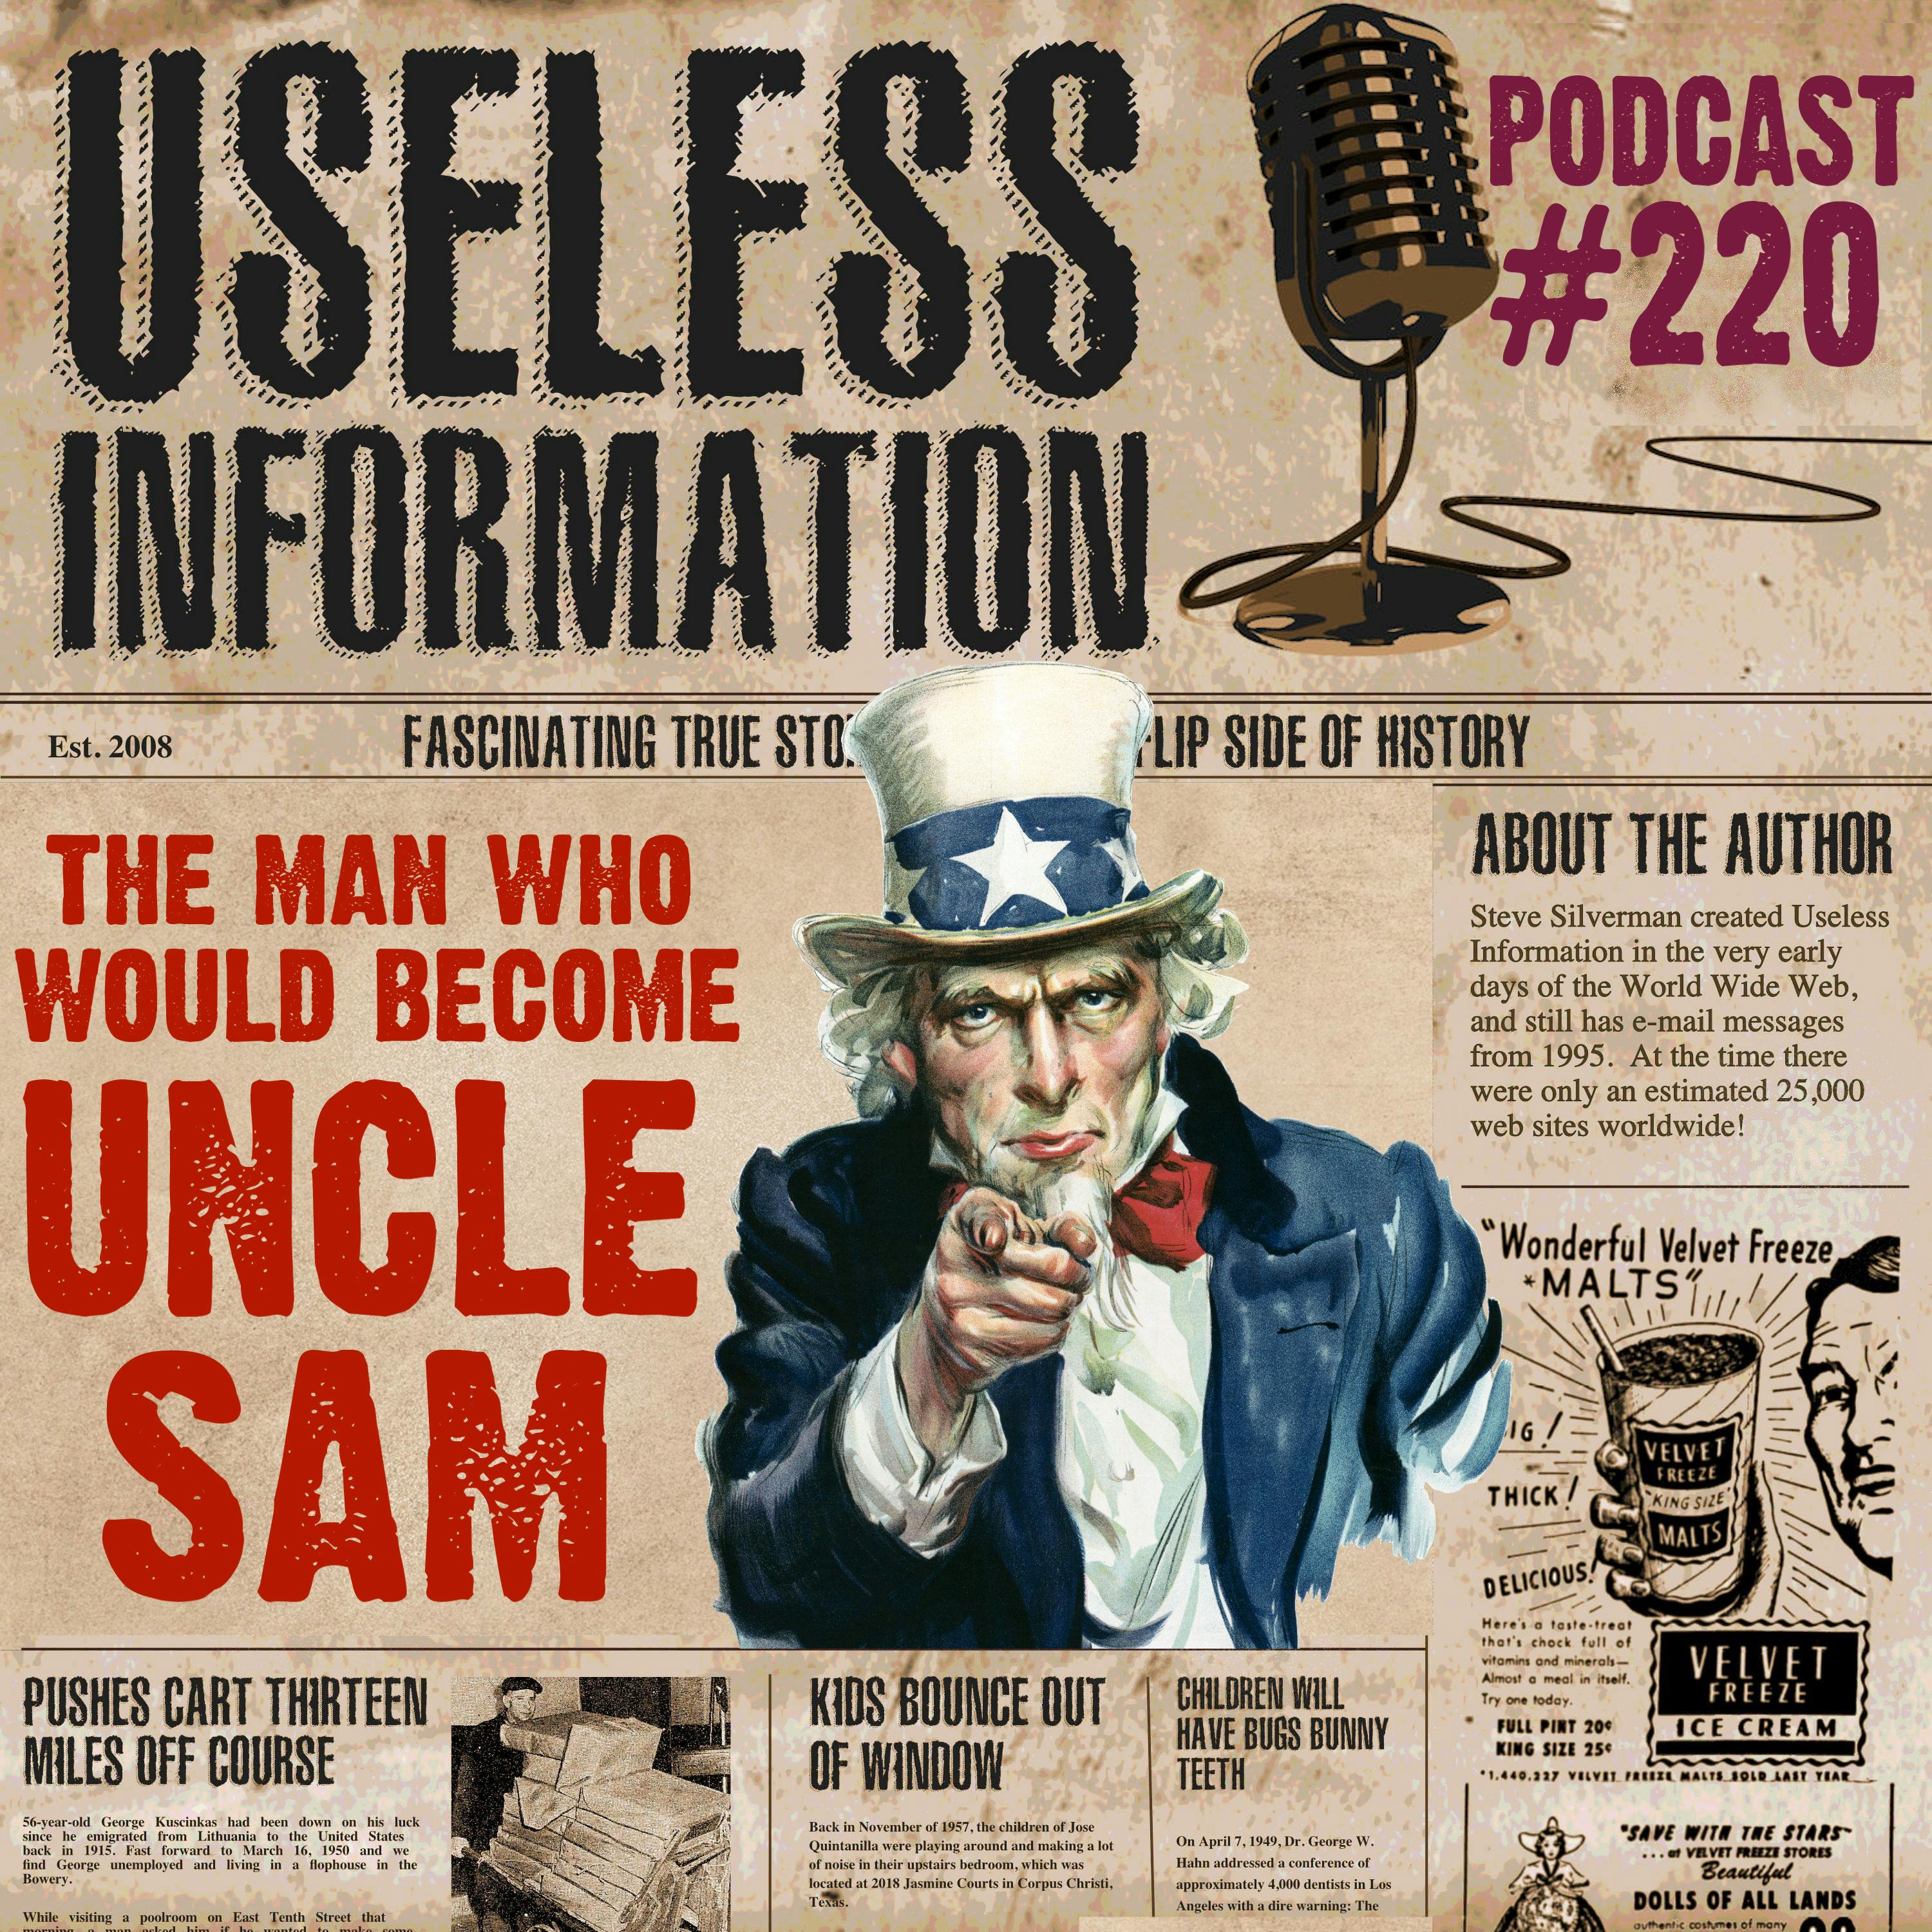 The Man Who Would Become Uncle Sam - UI #220